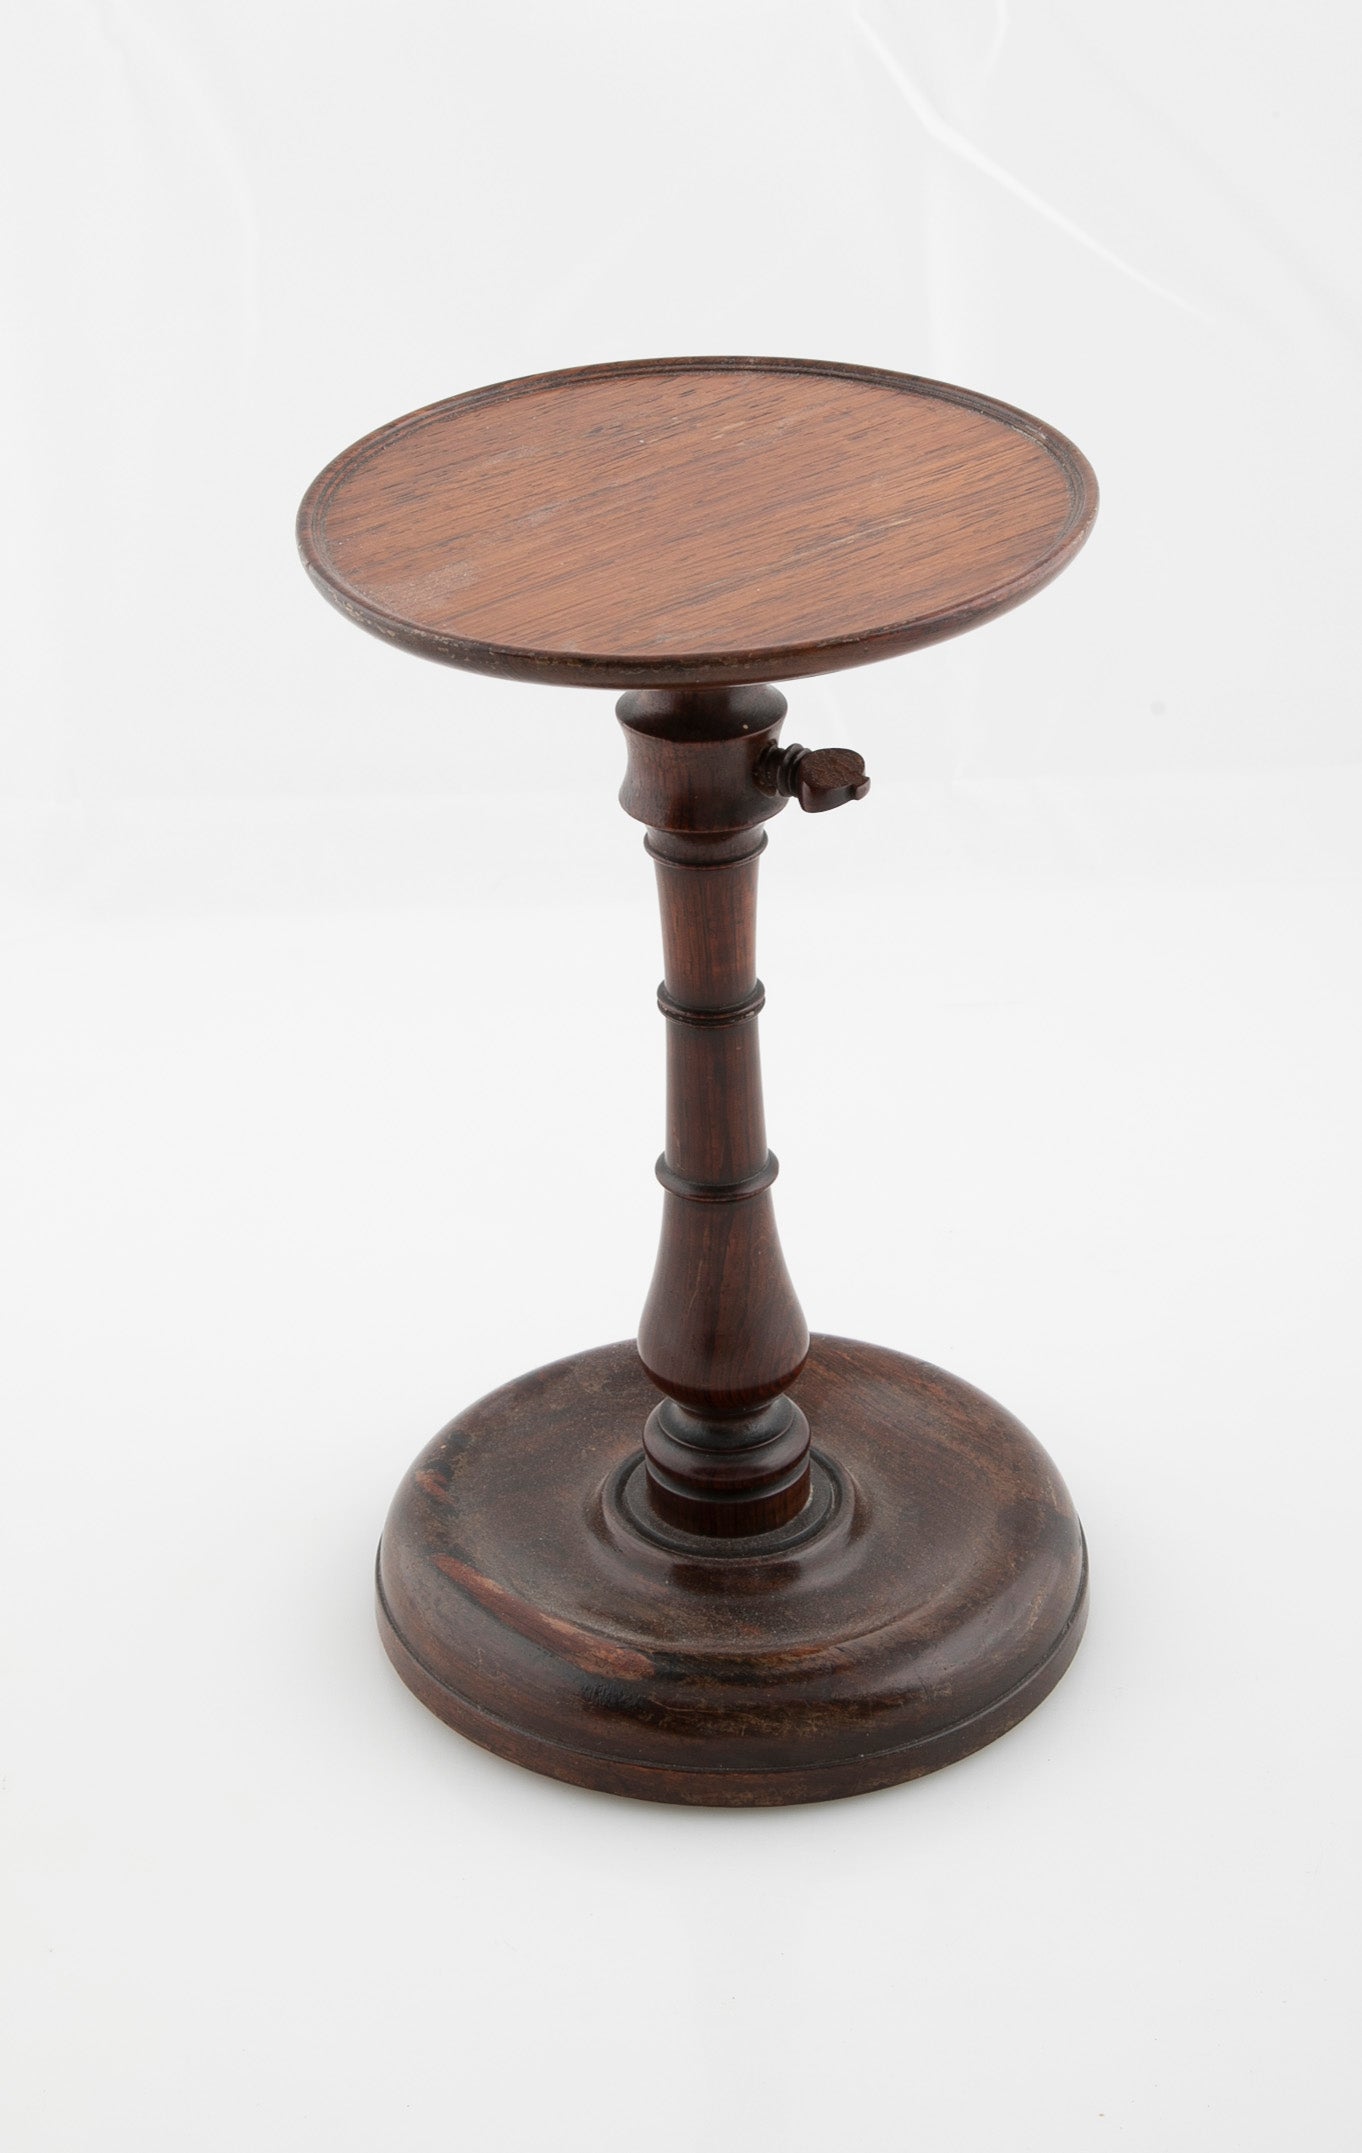 Pair of English Rosewood Candlestands